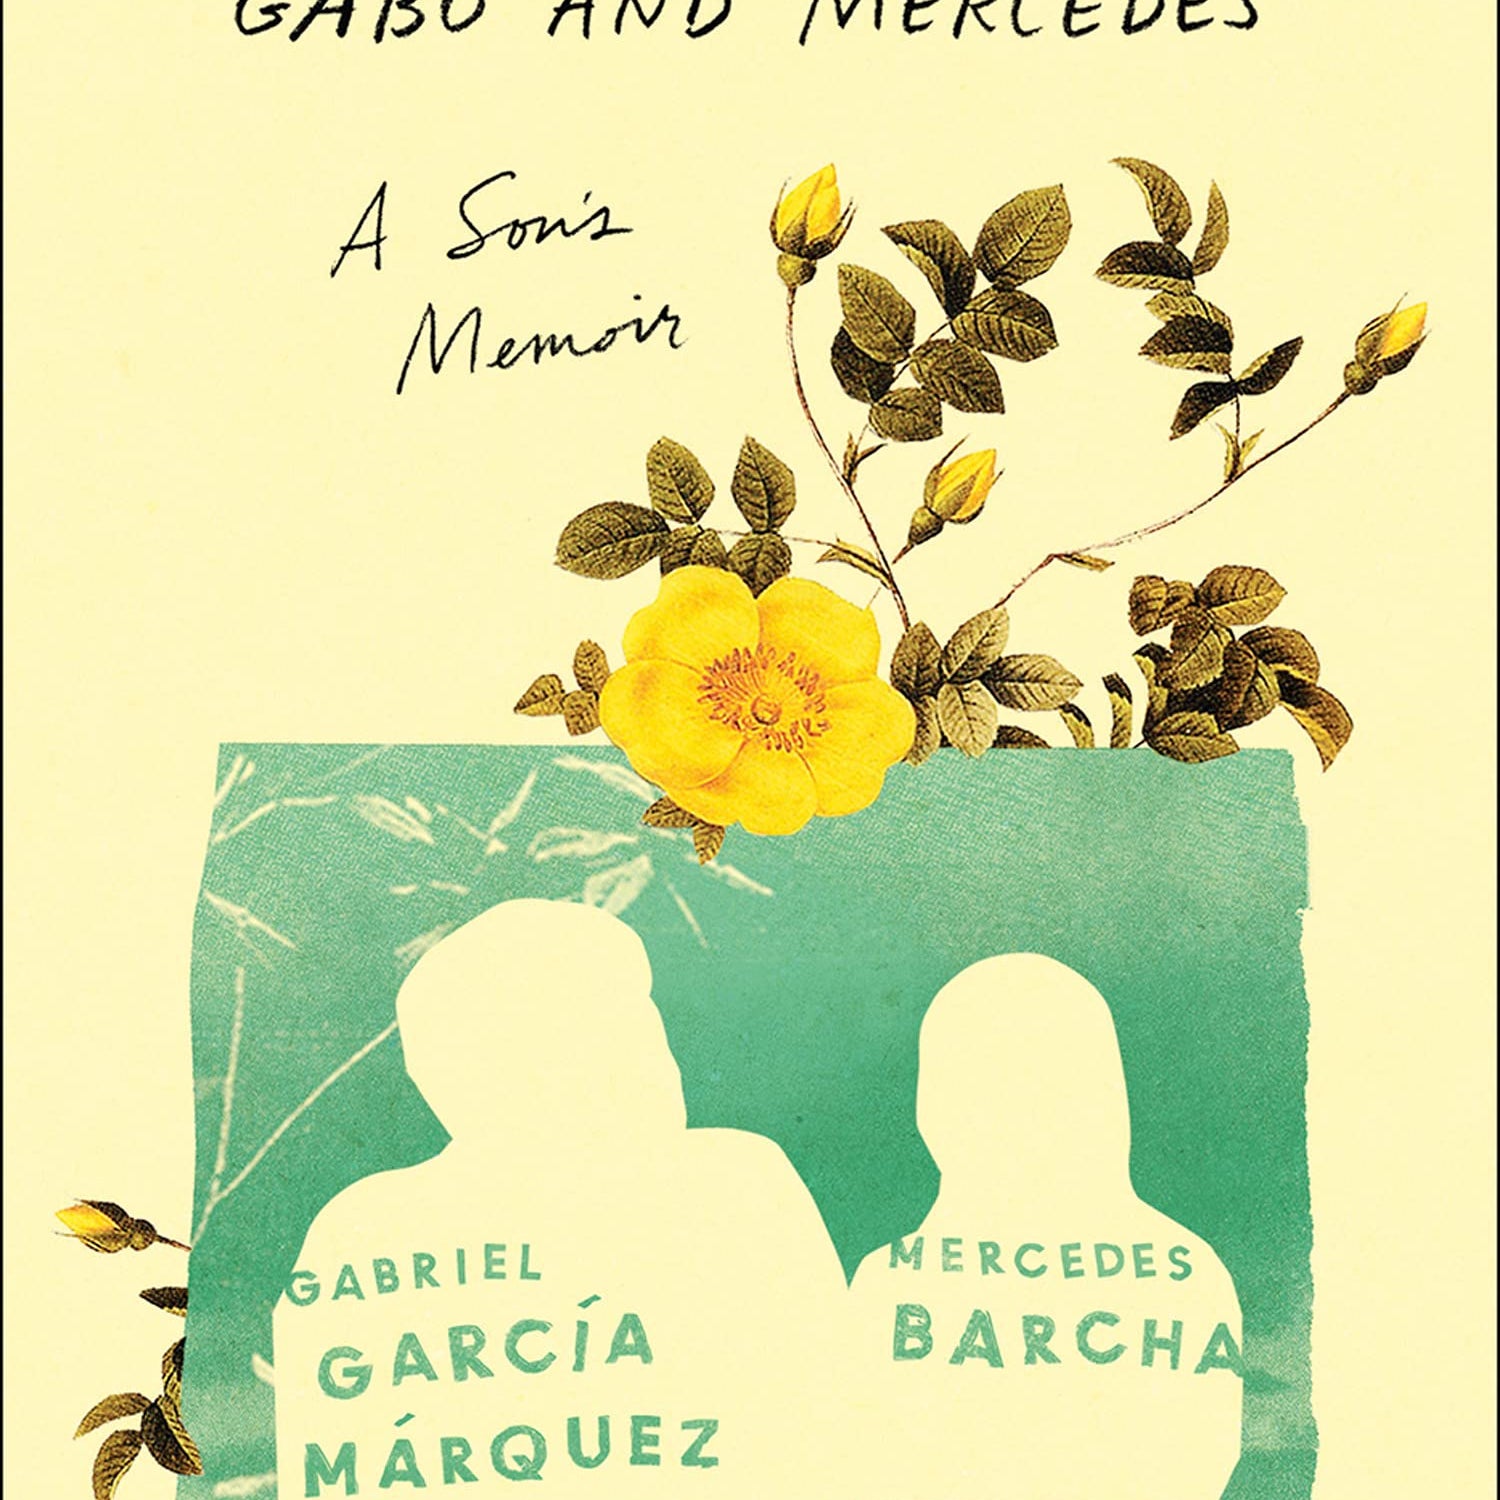 A Farewell to Gabo and Mercedes Default Title